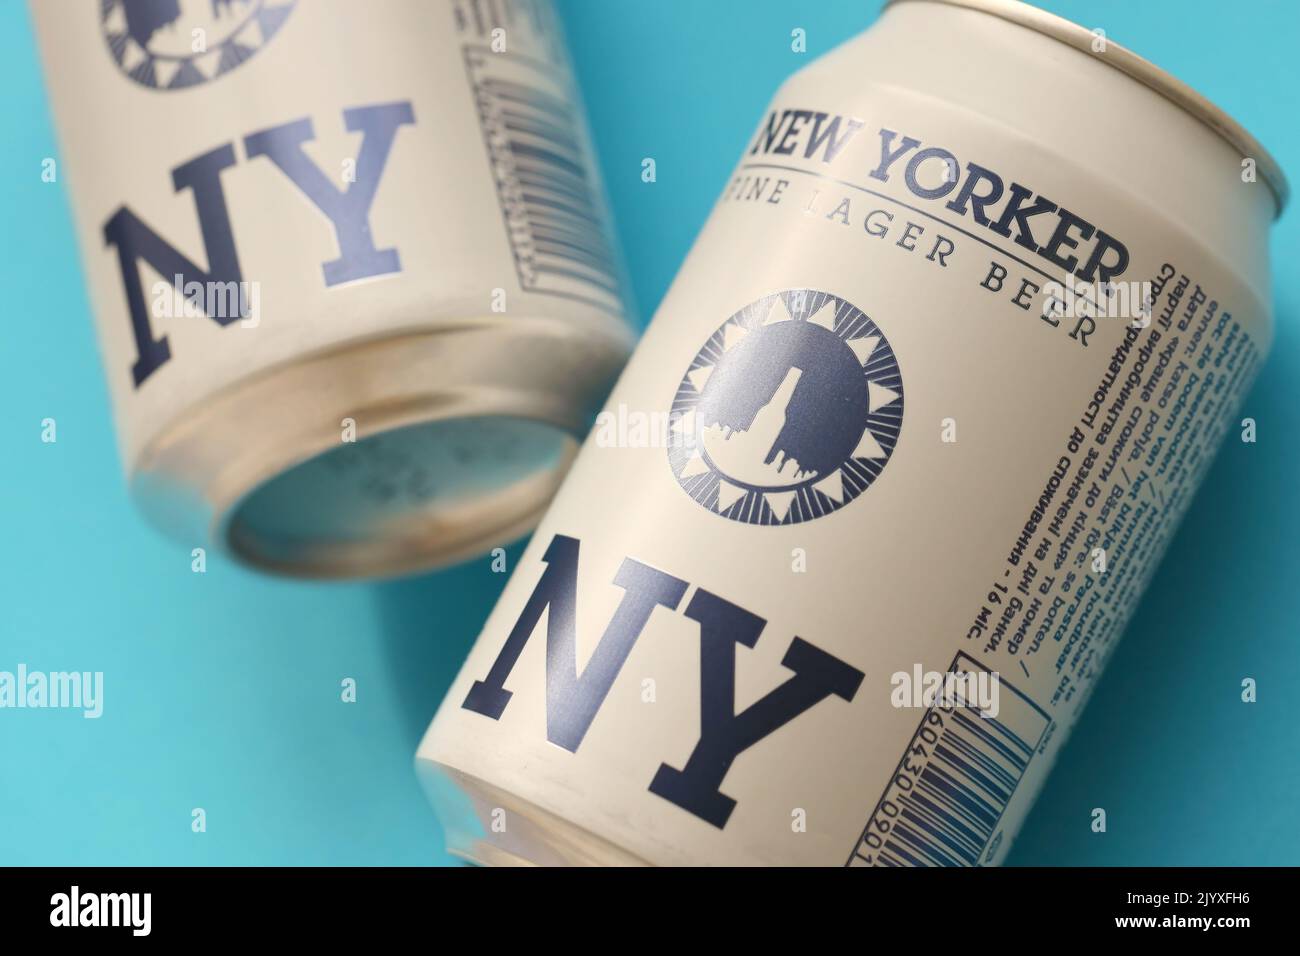 TERNOPIL, UKRAINE - JULY 18, 2022 Two cans of New Yorker fine lager beer with original logo and design on blue background Stock Photo